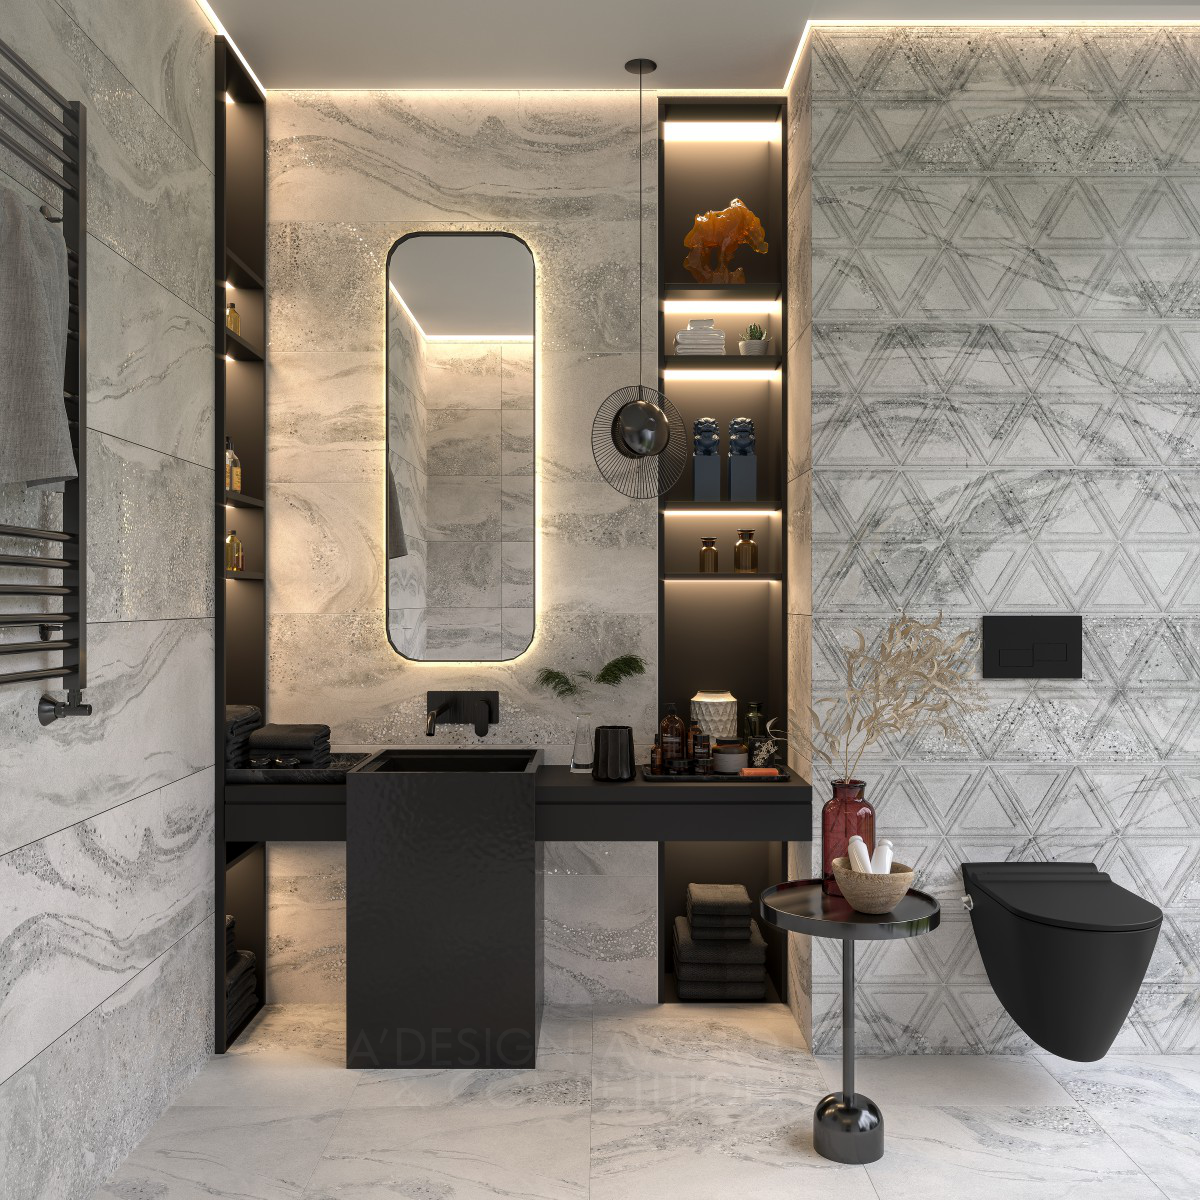 Bien Design Team wins Silver at the prestigious A' Building Materials and Construction Components Design Award with Famous Wall Tile and Glazed Porcelain.